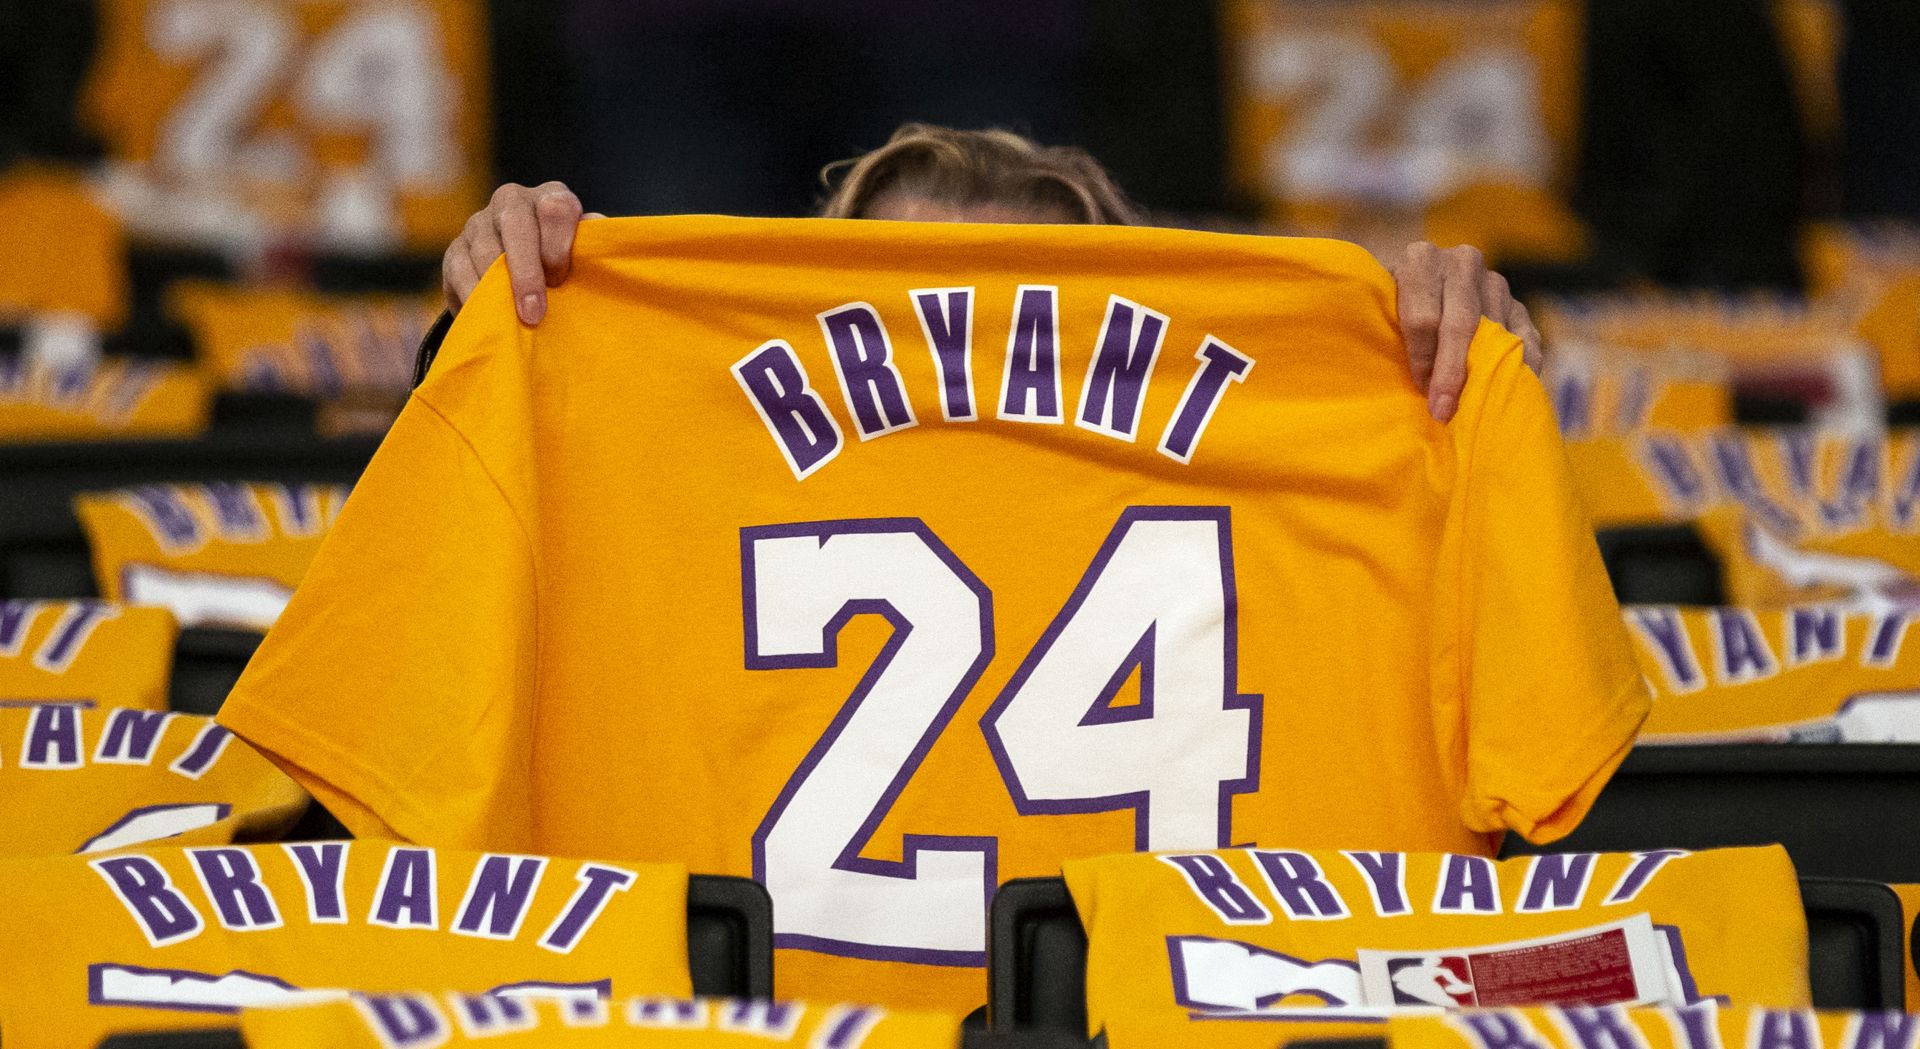 epaselect epa08183492 A woman looks at a late former Los Angeles Lakers Kobe Bryant t-shirt prior to the match between the Portland Trail Blazers and the Los Angeles Lakers at the Staples Center in Los Angeles, California, USA, 31 January 2020. Retired Los Angeles Lakers player Kobe Bryant died in a helicopter crash on 26 January 2020. Thousands of Kobe Bryant jerseys were displayed on the spectators seats as a gift.  EPA/ETIENNE LAURENT SHUTTERSTOCK OUT